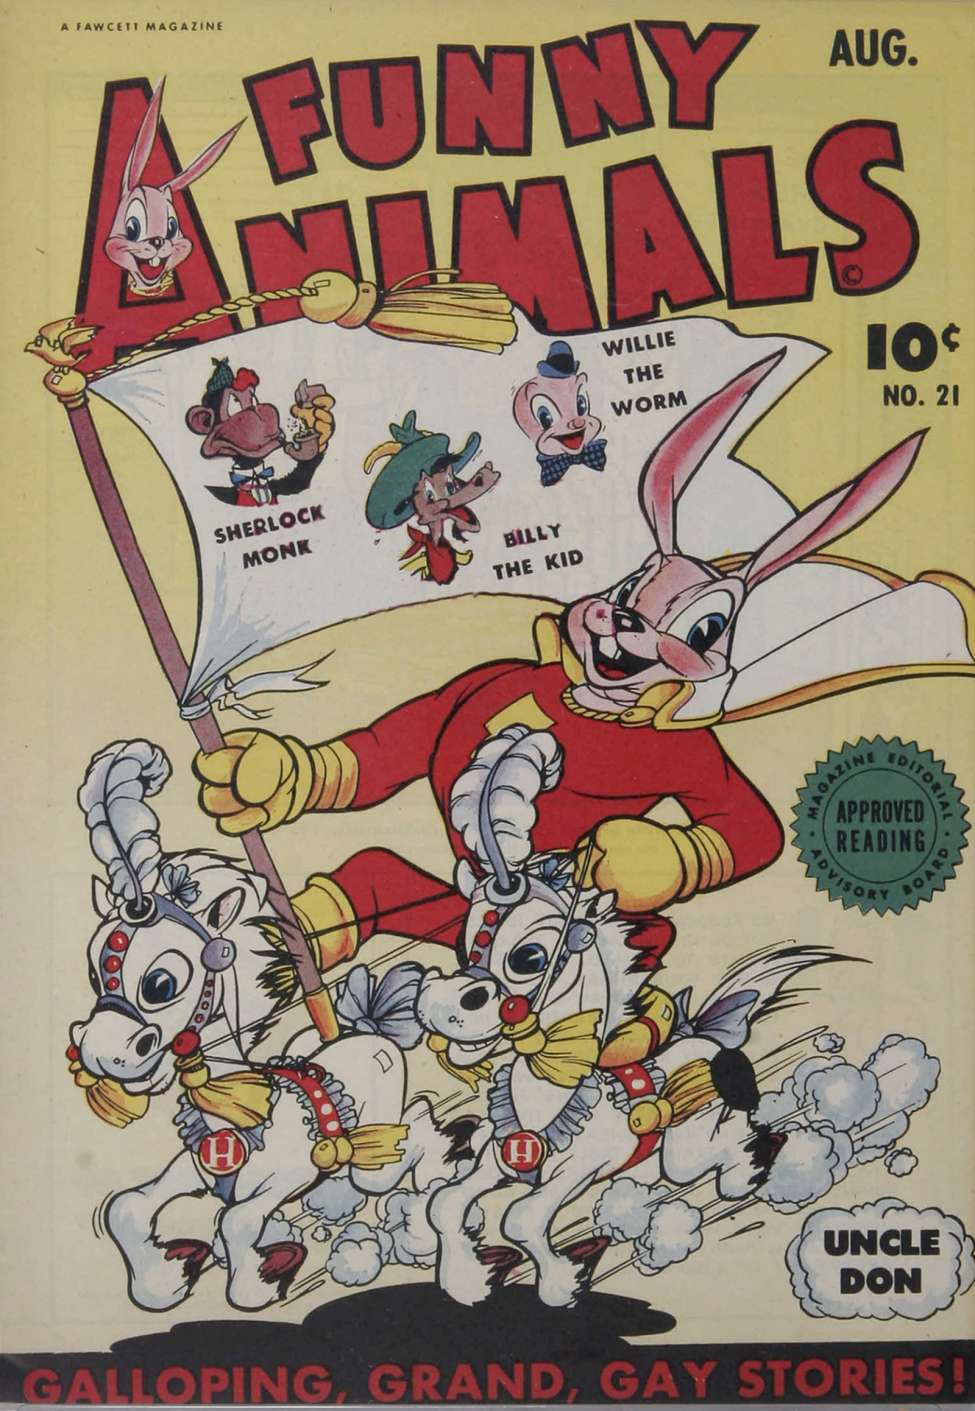 Book Cover For Fawcett's Funny Animals 21